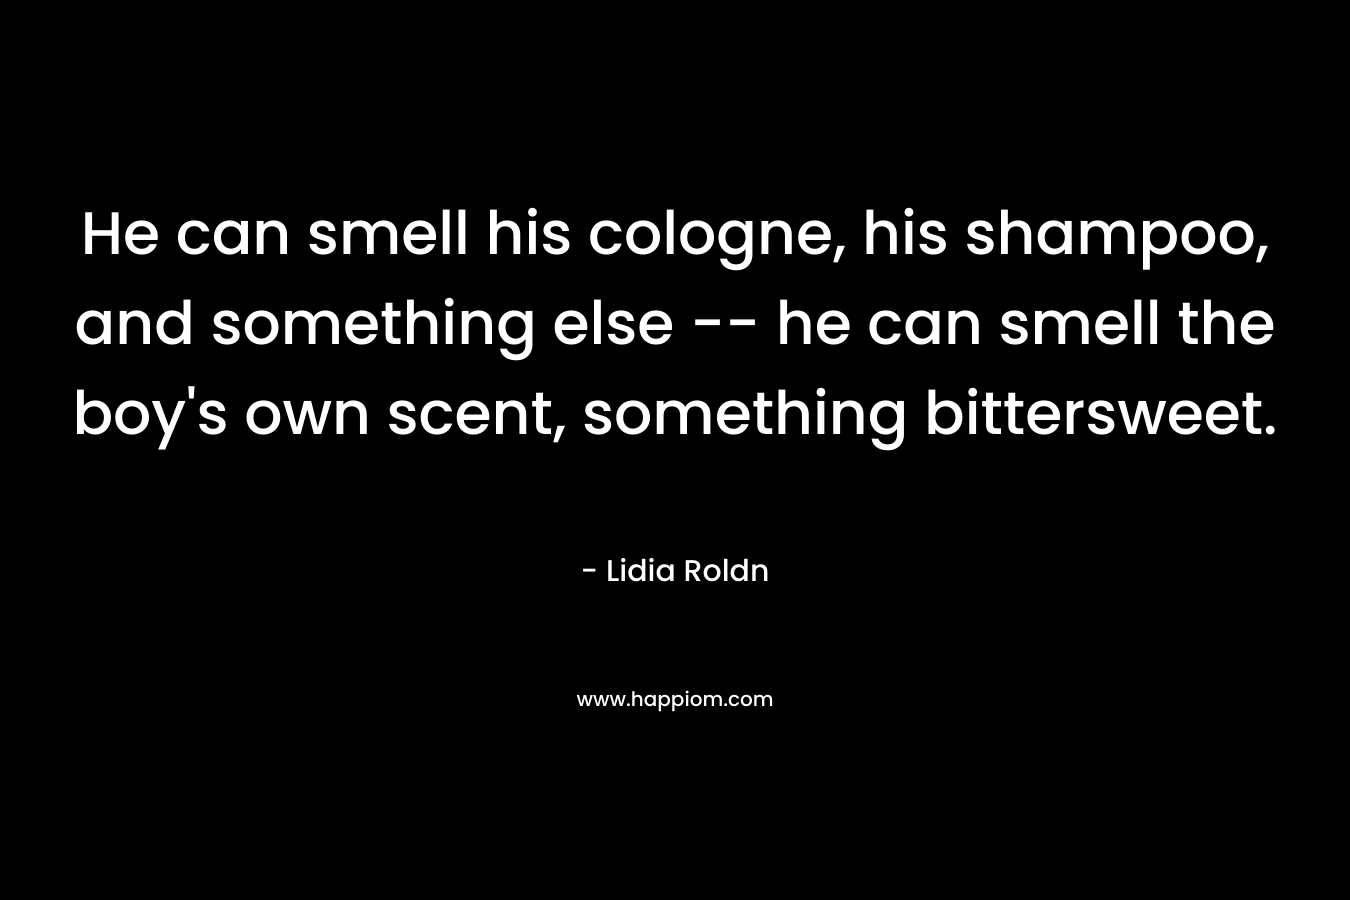 He can smell his cologne, his shampoo, and something else — he can smell the boy’s own scent, something bittersweet. – Lidia Roldn